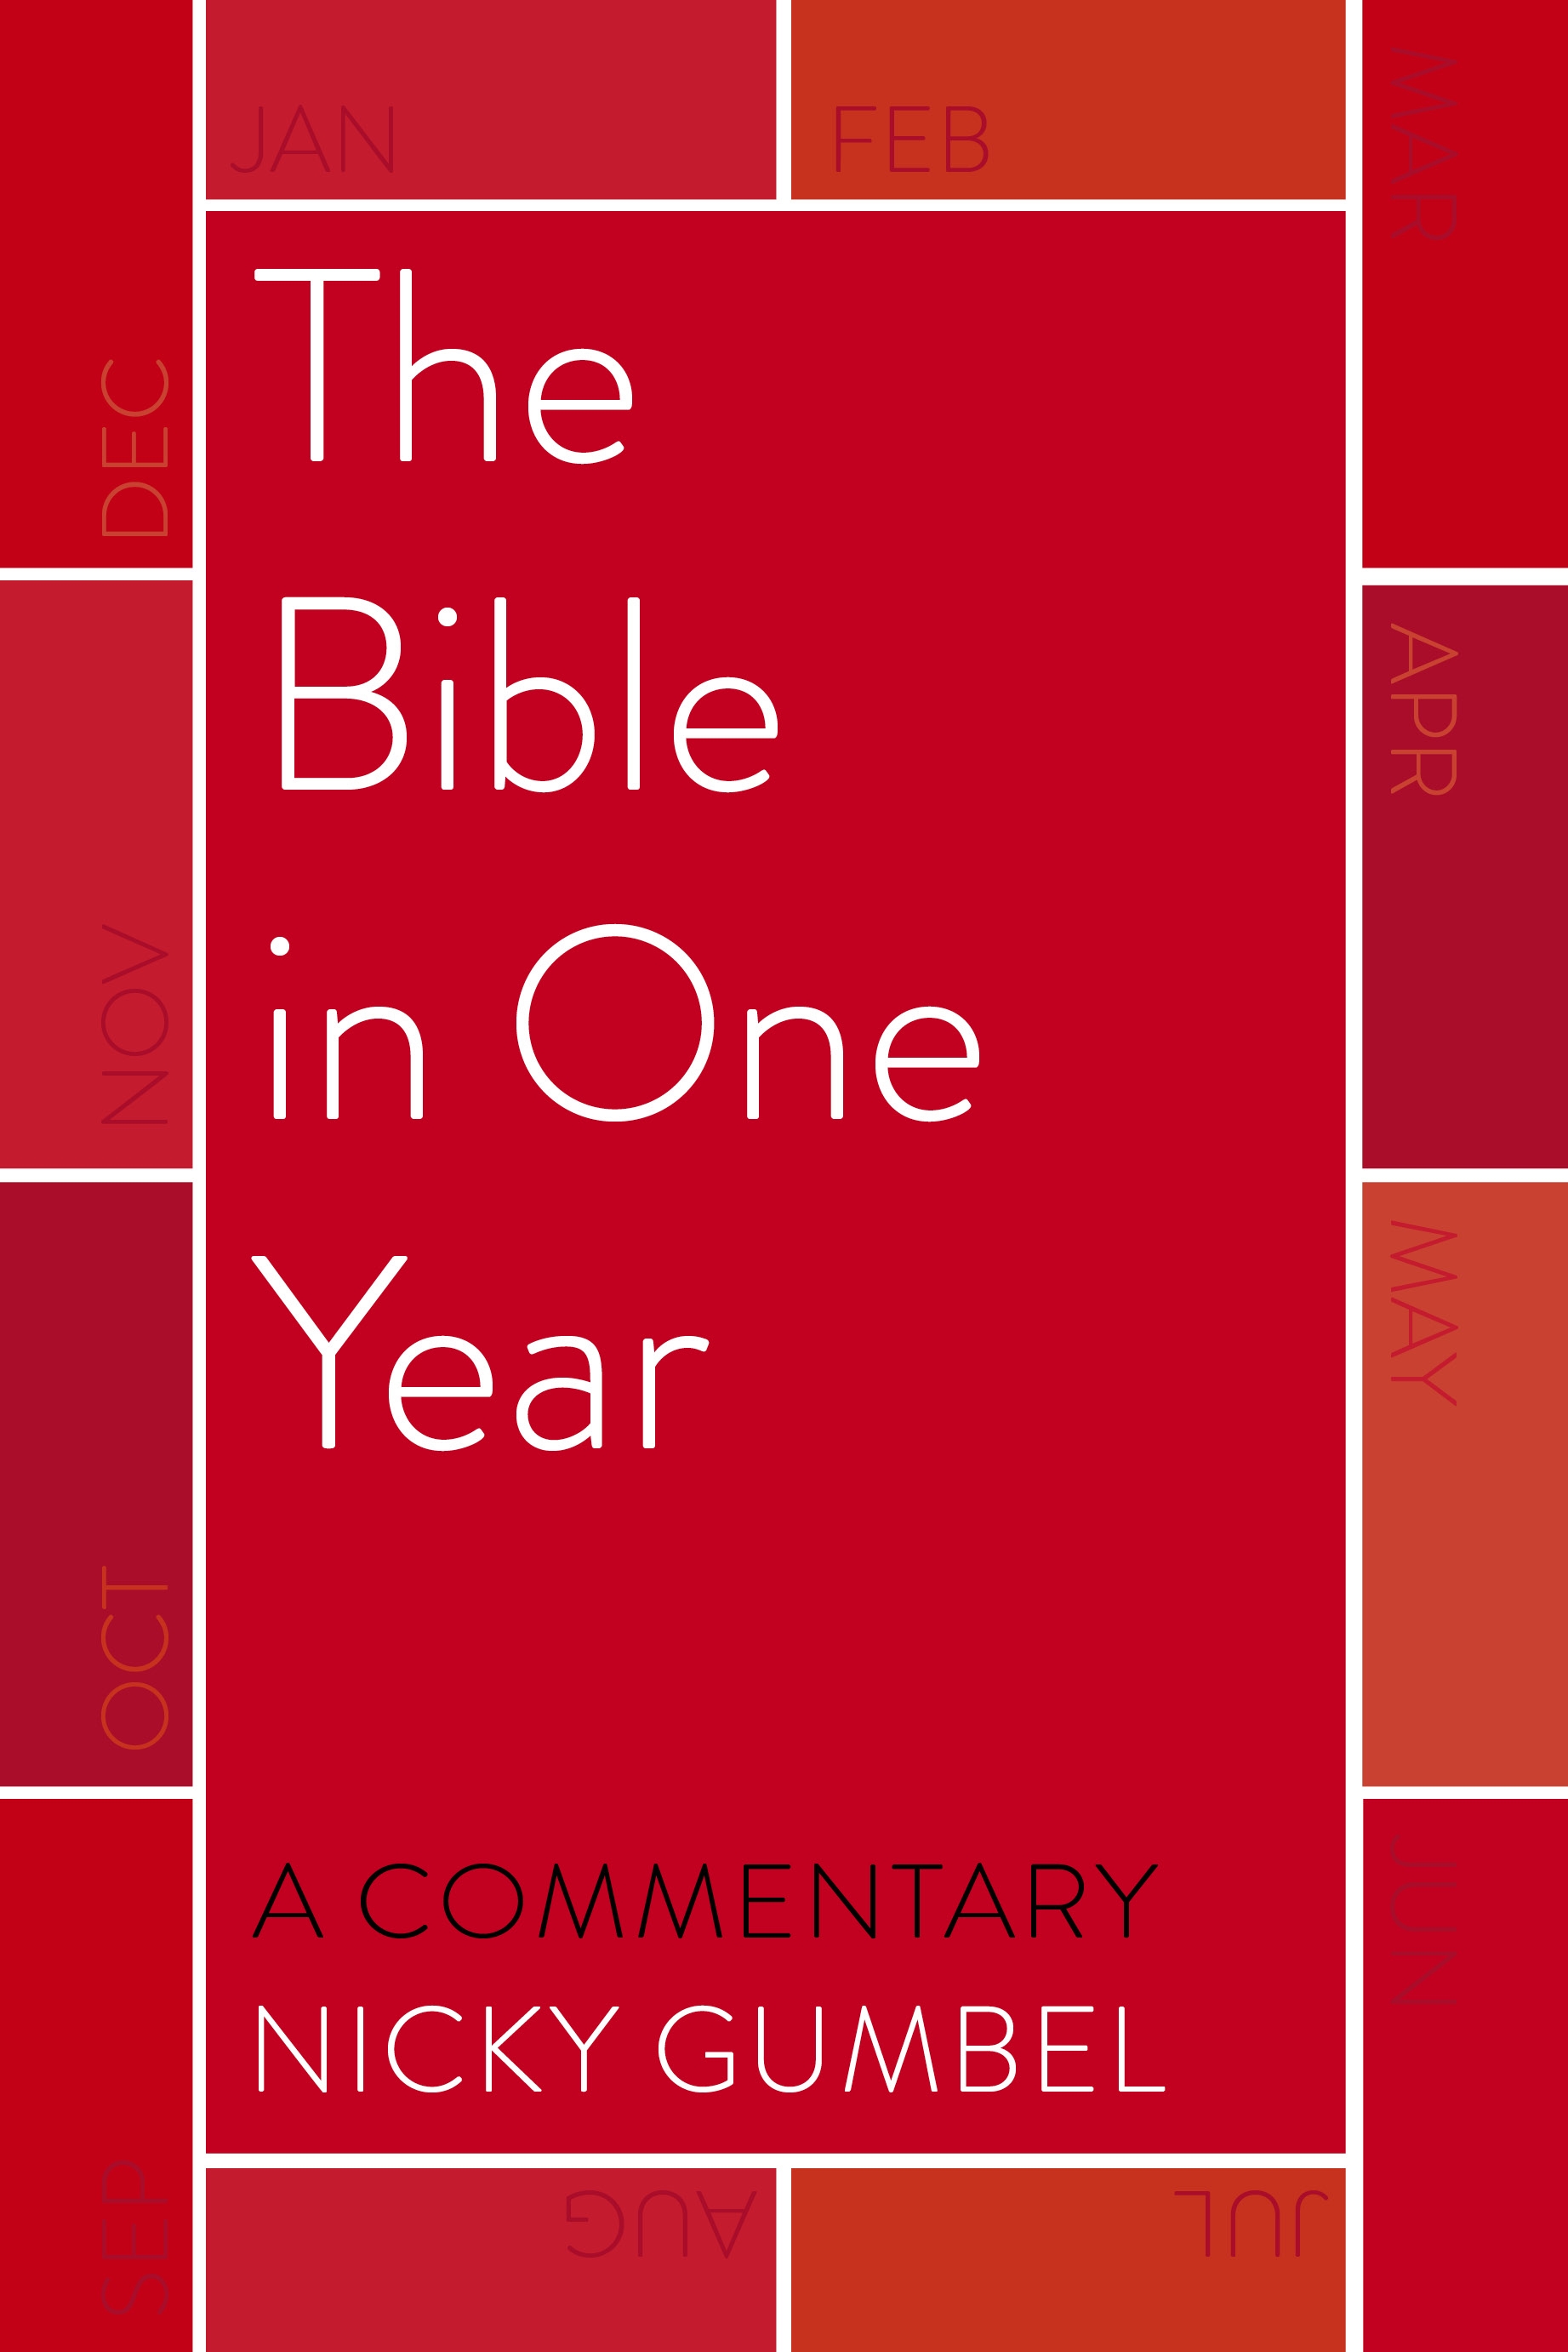 The Bible in One Year a Commentary by Nicky Gumbel by Nicky Gumbel